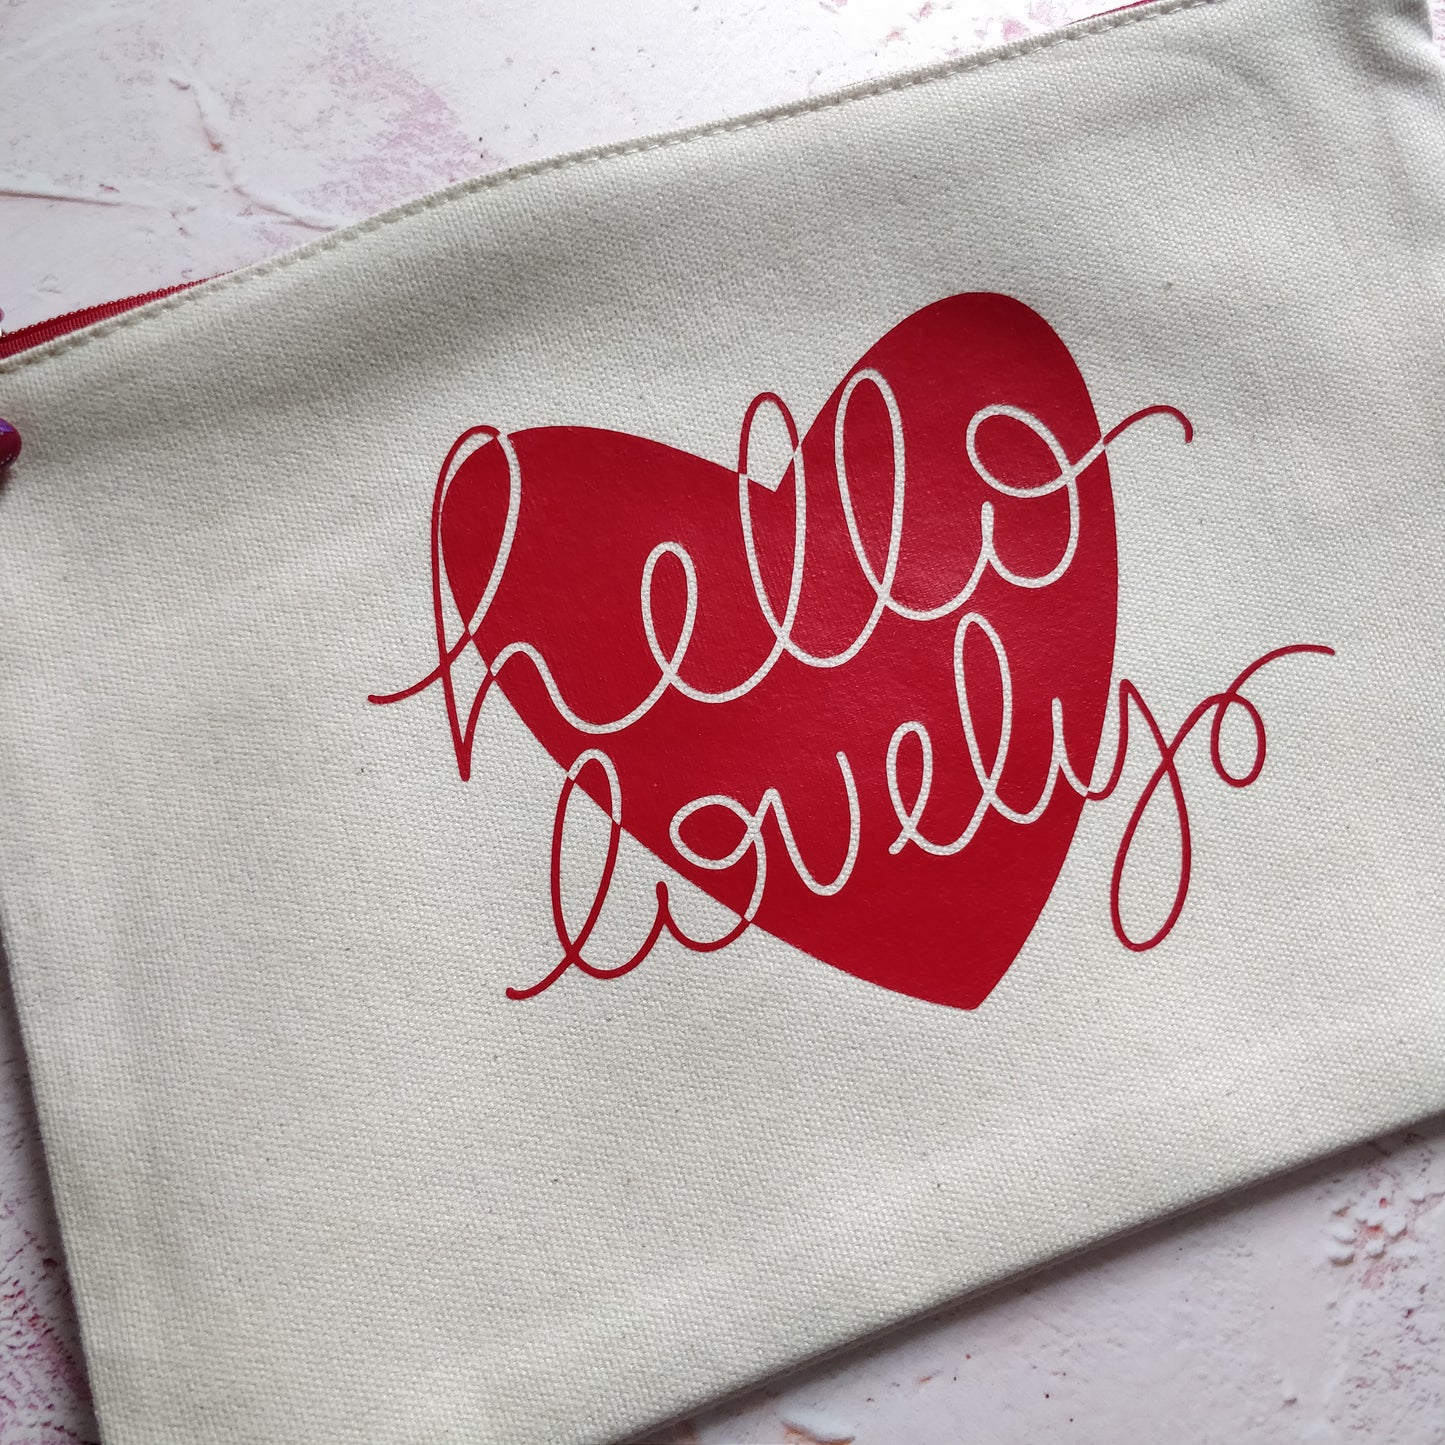 Hello Lovely Cotton Pouch with Wrist Strap - Fay Dixon Design